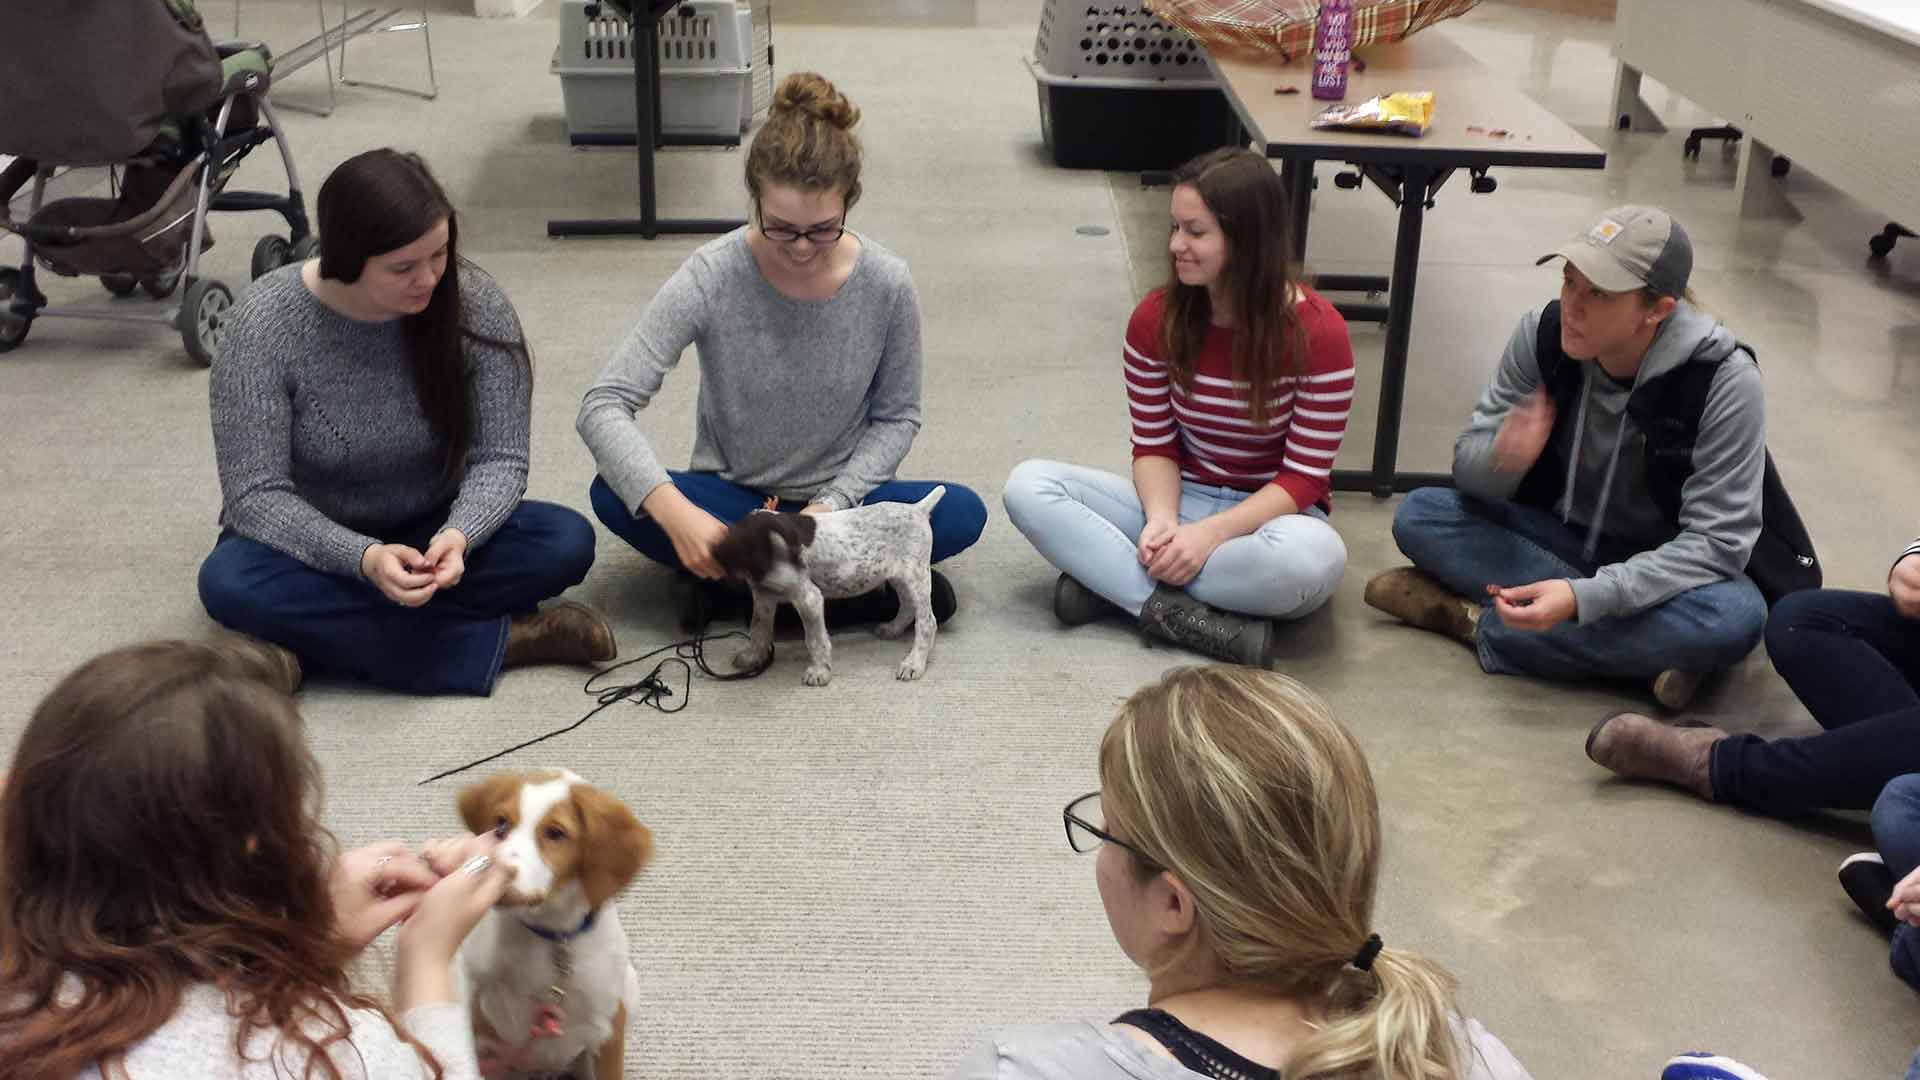 Students socializing with puppies in class.